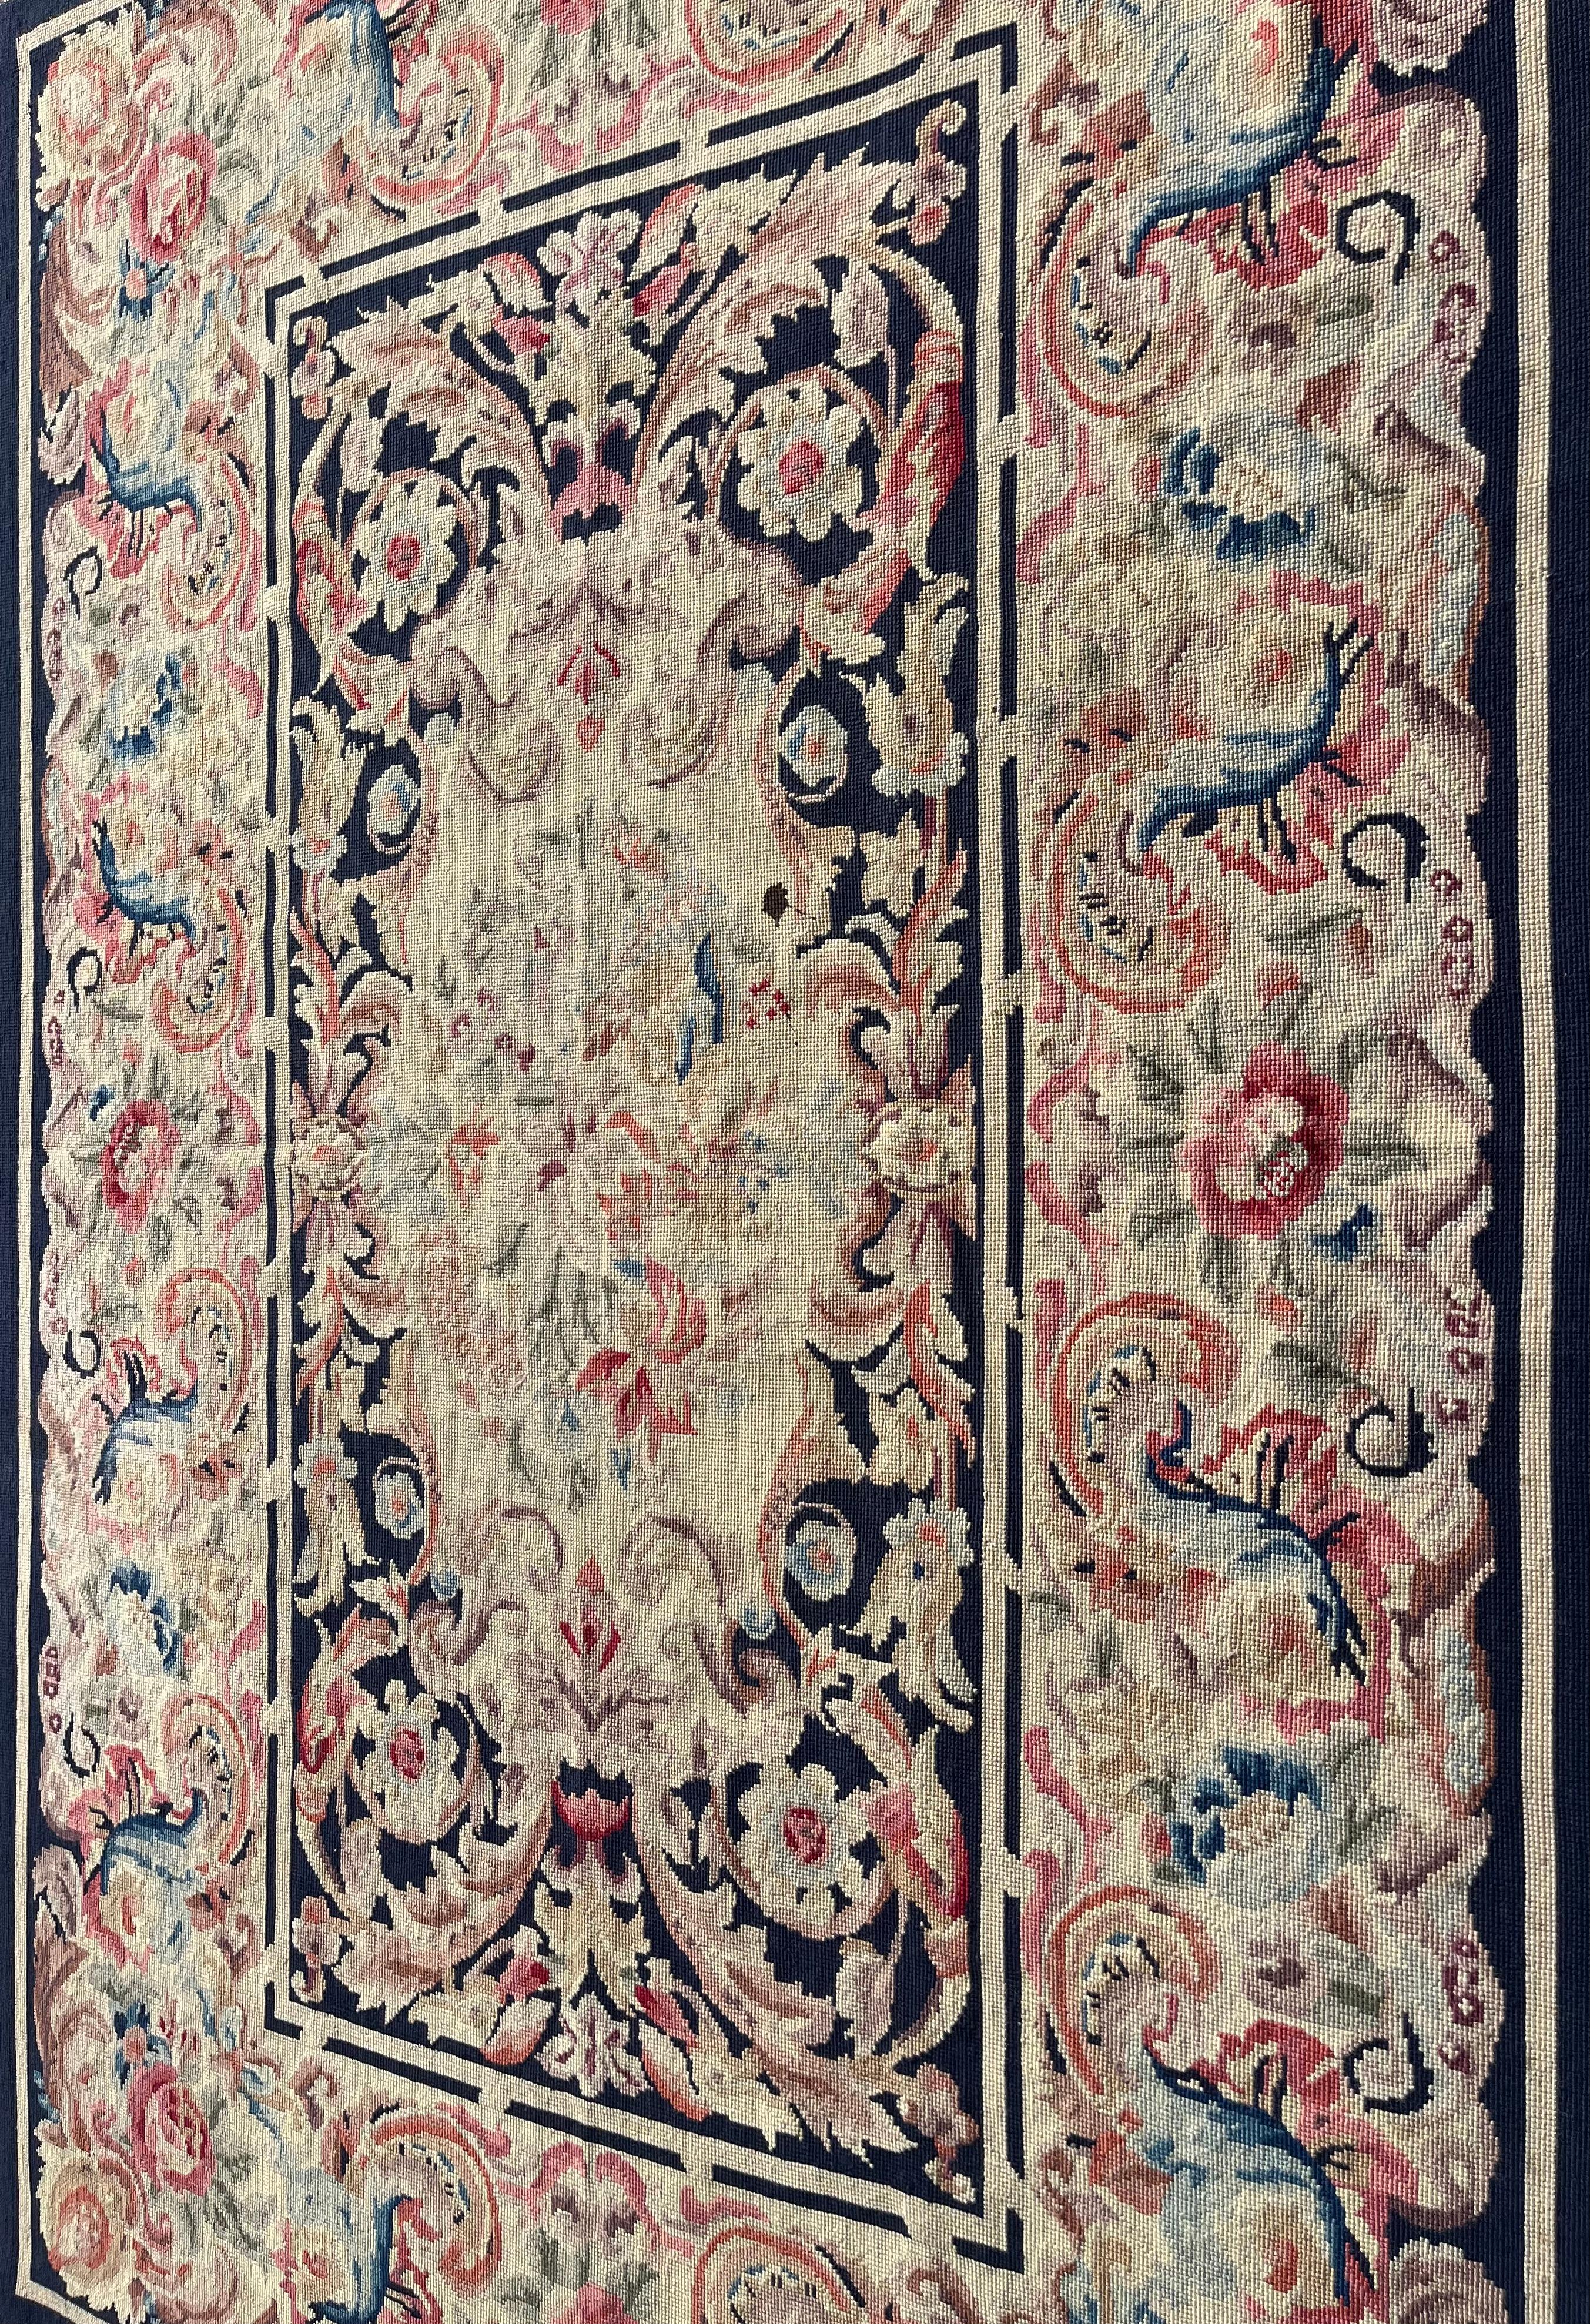 Hand-Knotted Carpet with knotted stitches in the style of Aubusson For Sale